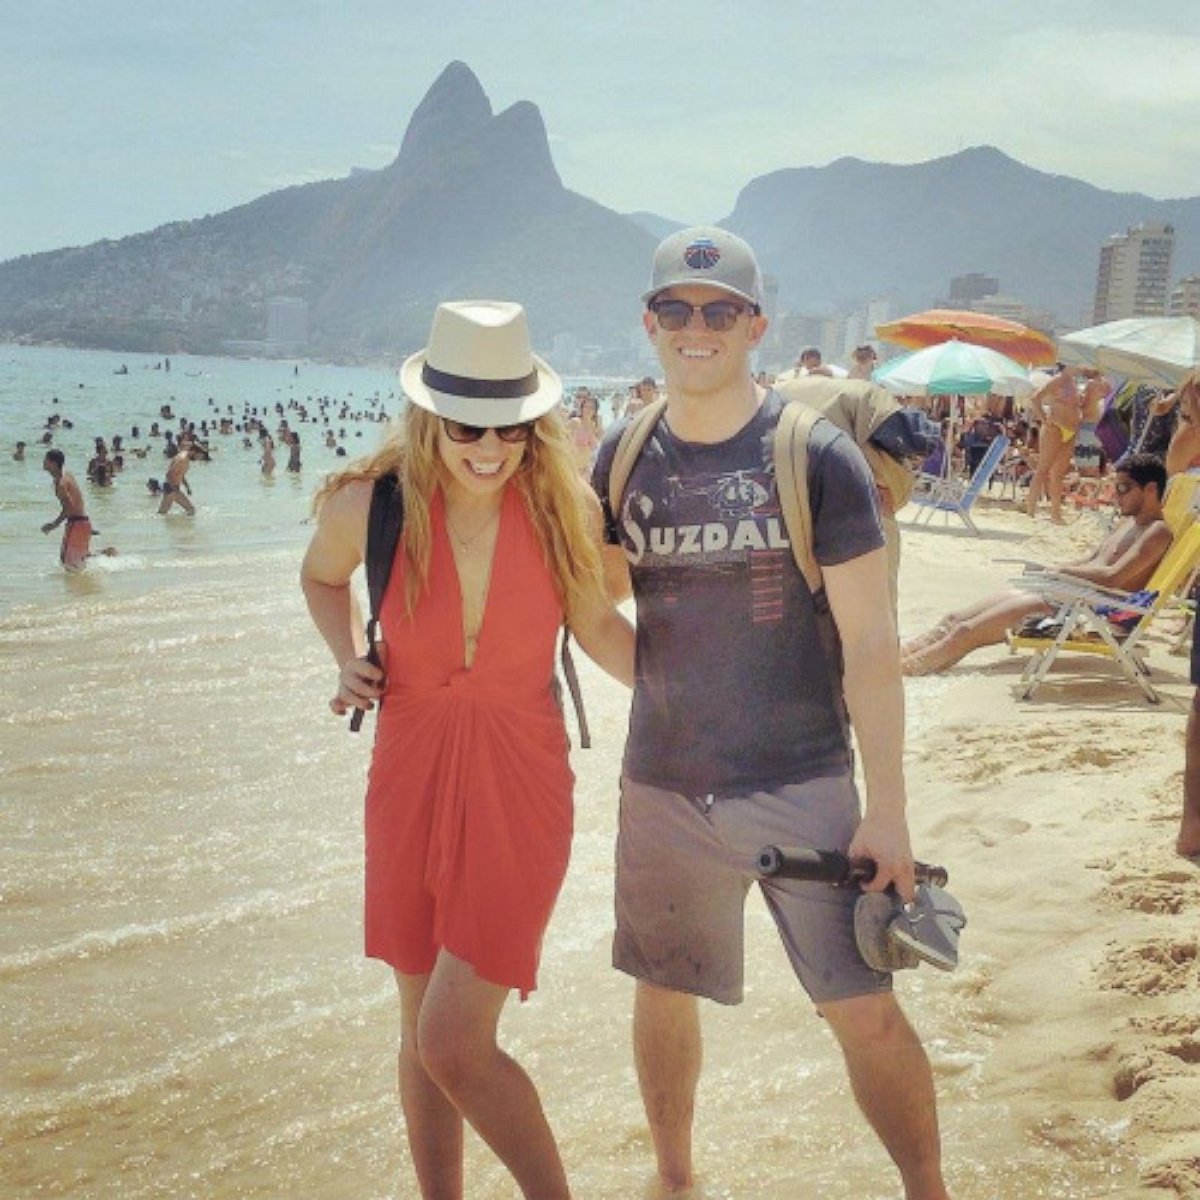 PHOTO: Megan Sullivan and Chris McNamara in Brazil on their trip to see the Seven Wonders of the World in 13 days.
